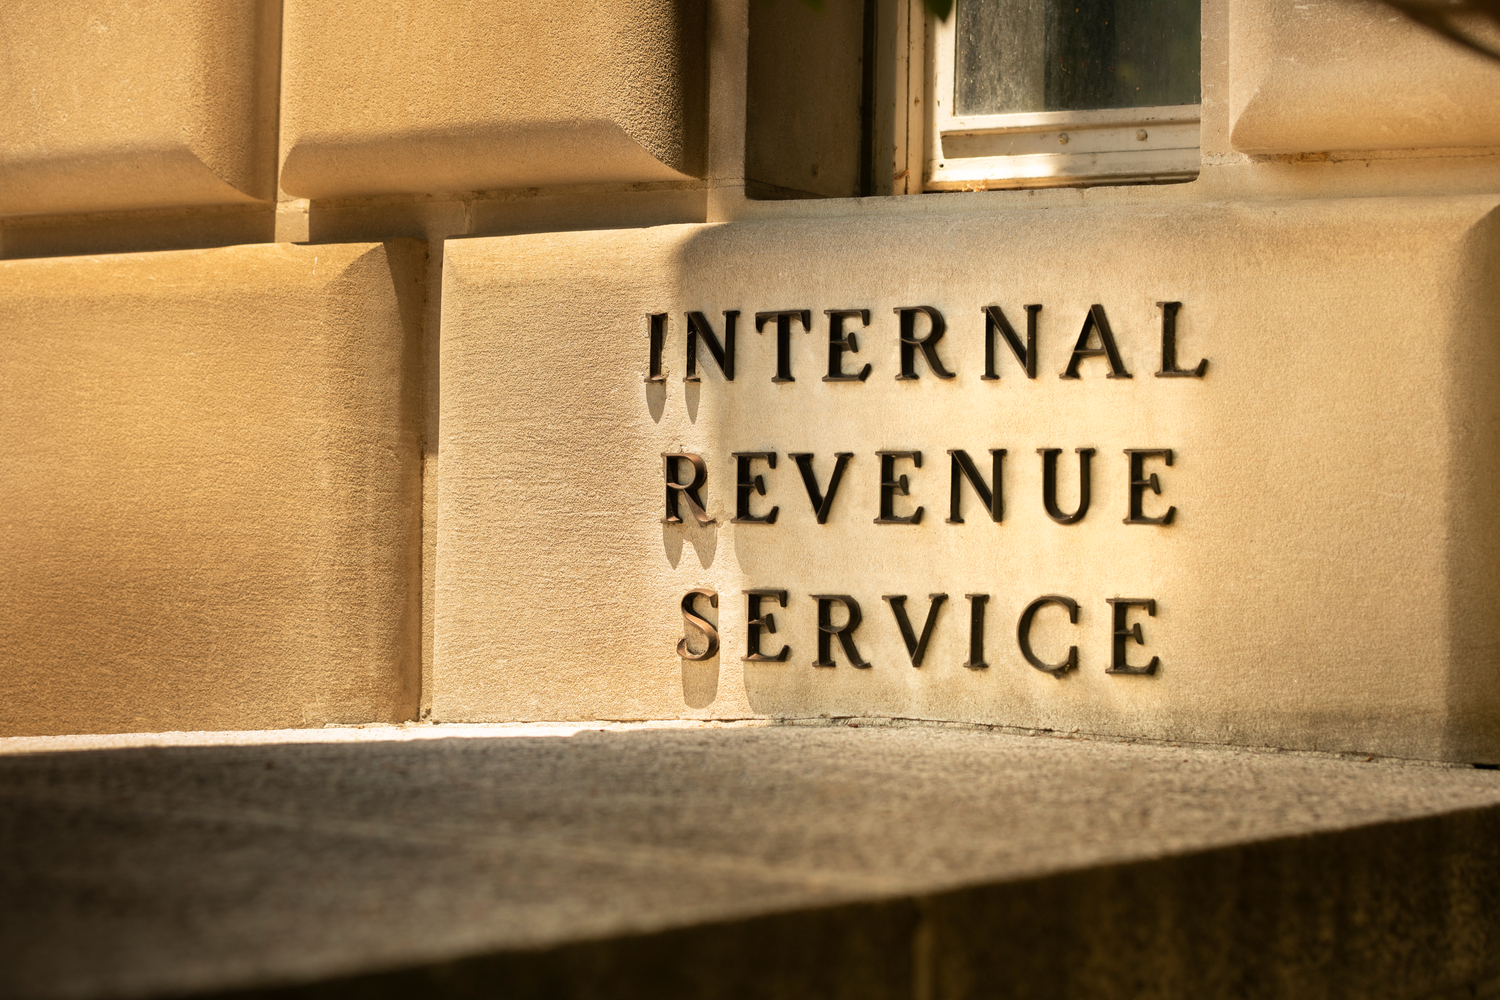 The-irs-is-inviting-crypto-firms-to-a-‘summit’-in-dc-next-month